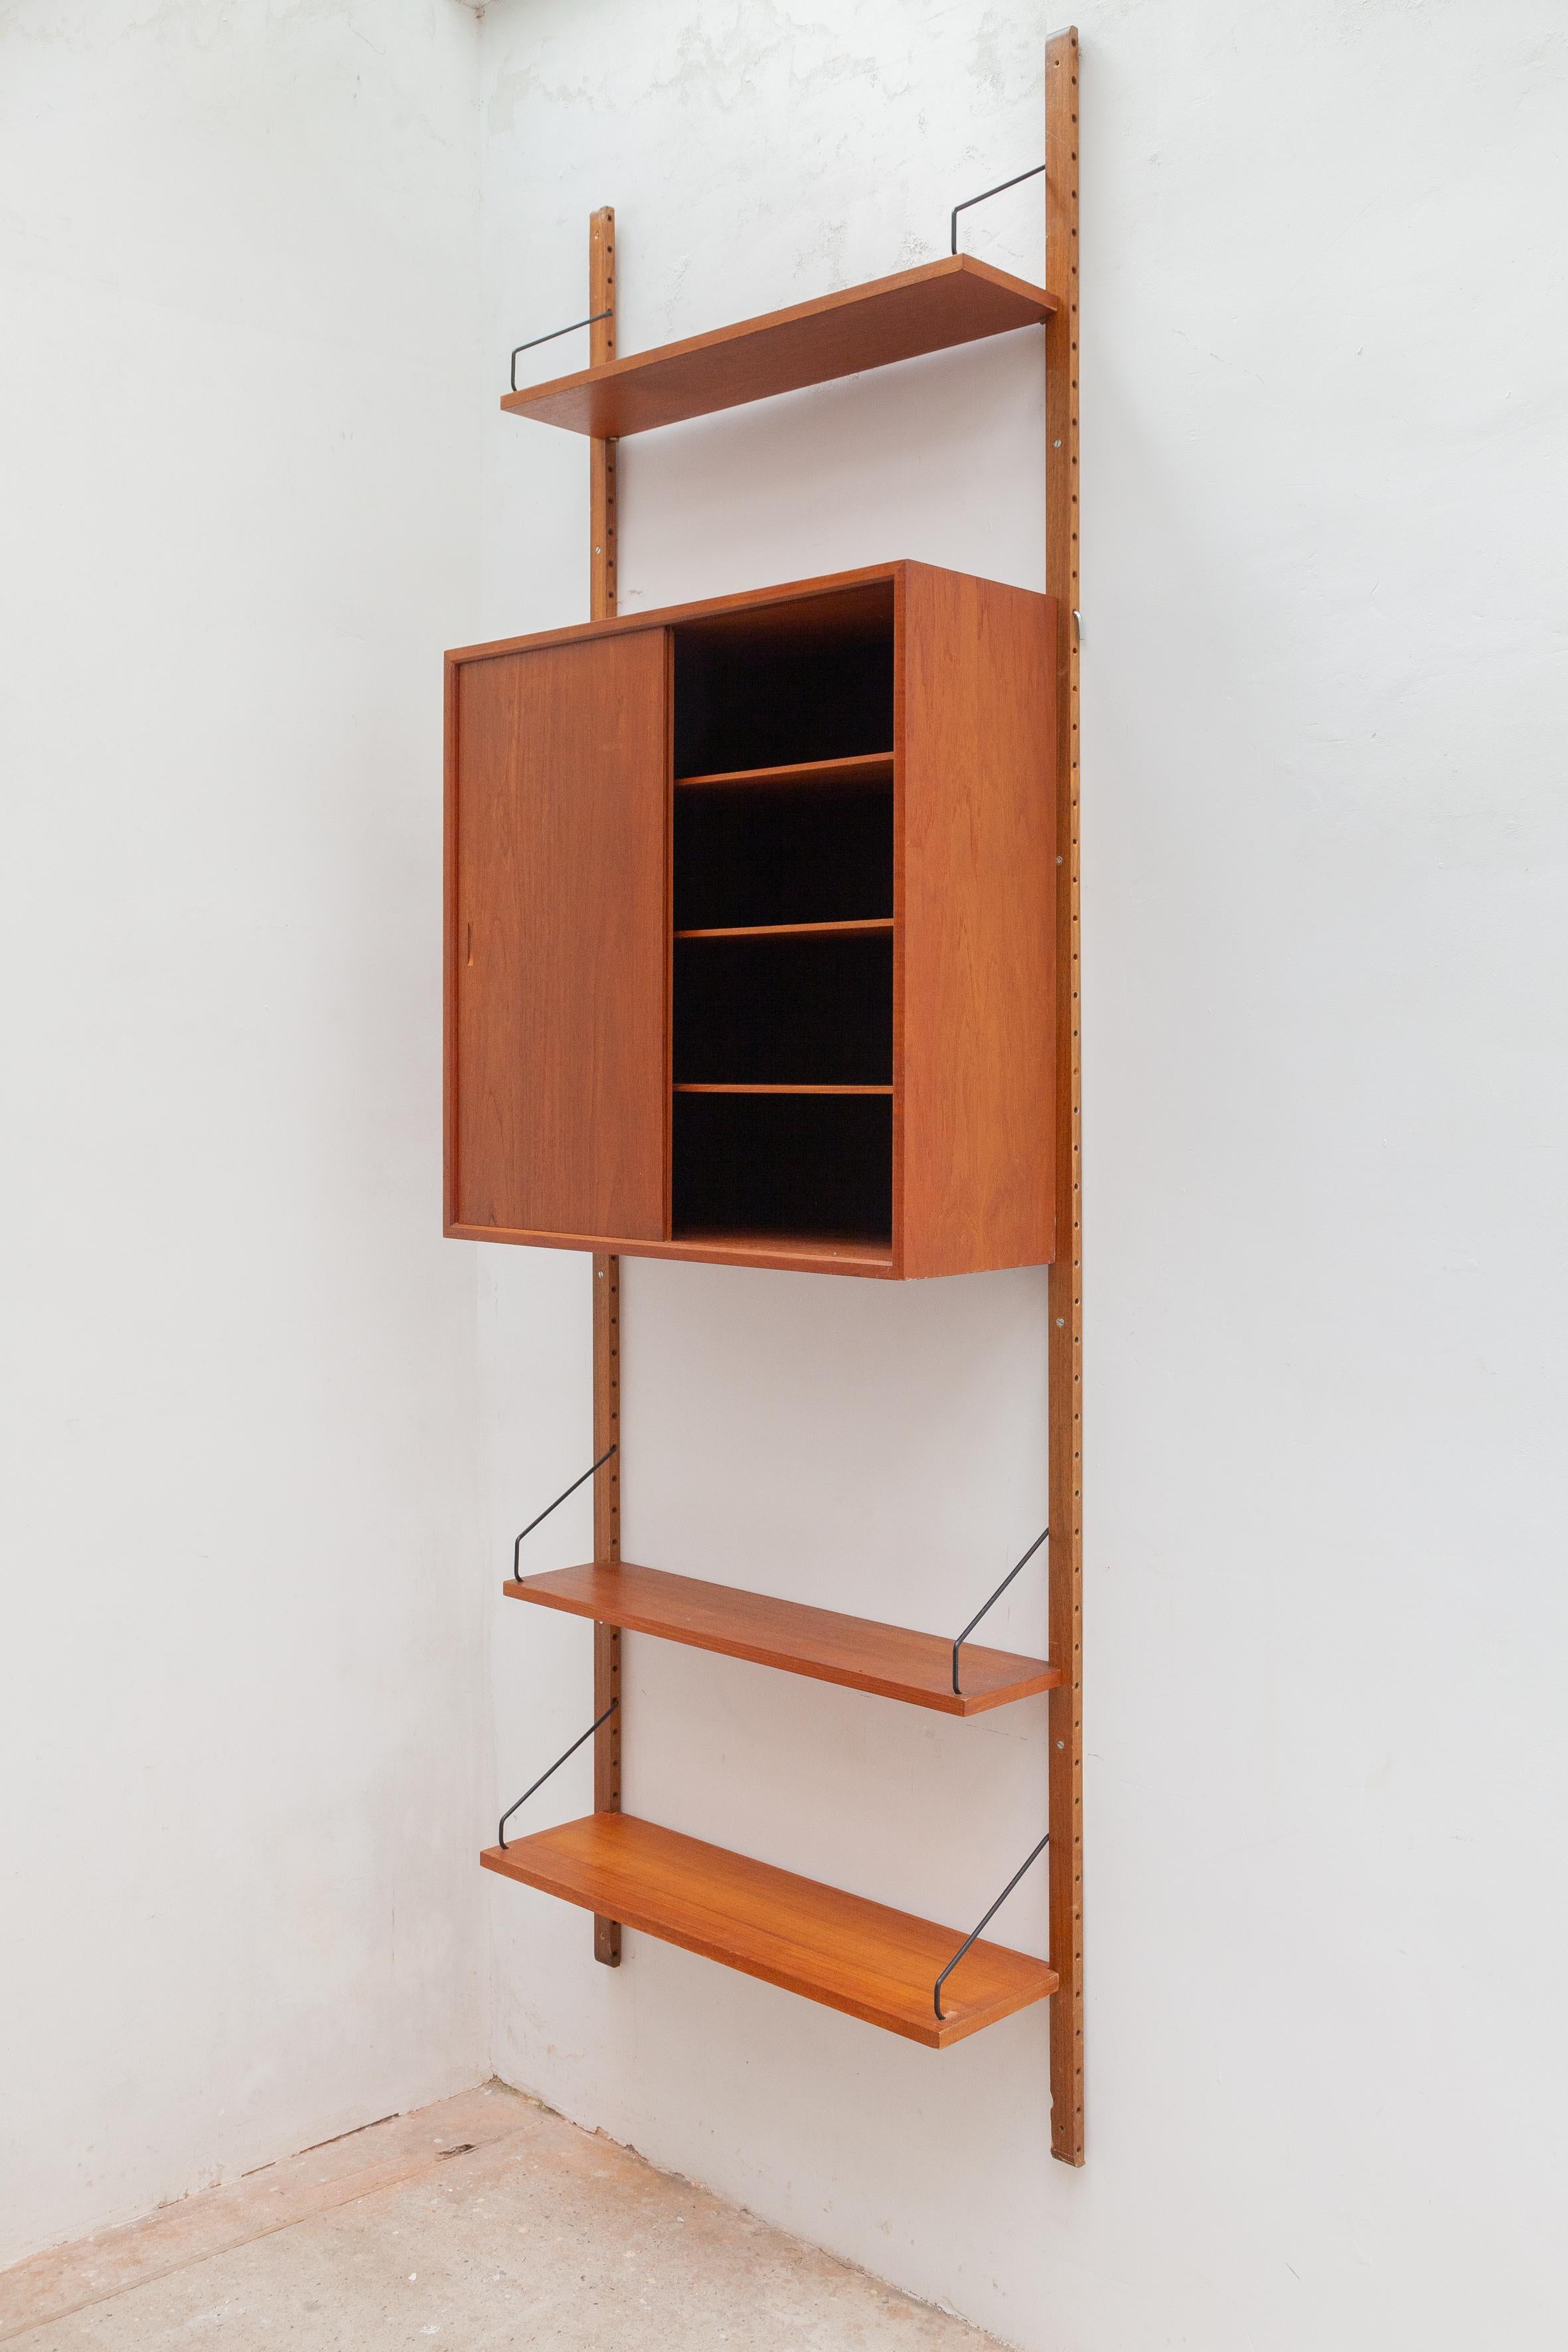 Vintage Danish teak wall unit by Poul Cadovius for Cado, 1960s.This modular system is perfect for use in a small space or as an addition to your already existing modular system.


Cadovius had the revolutionary idea to design a floating, modular